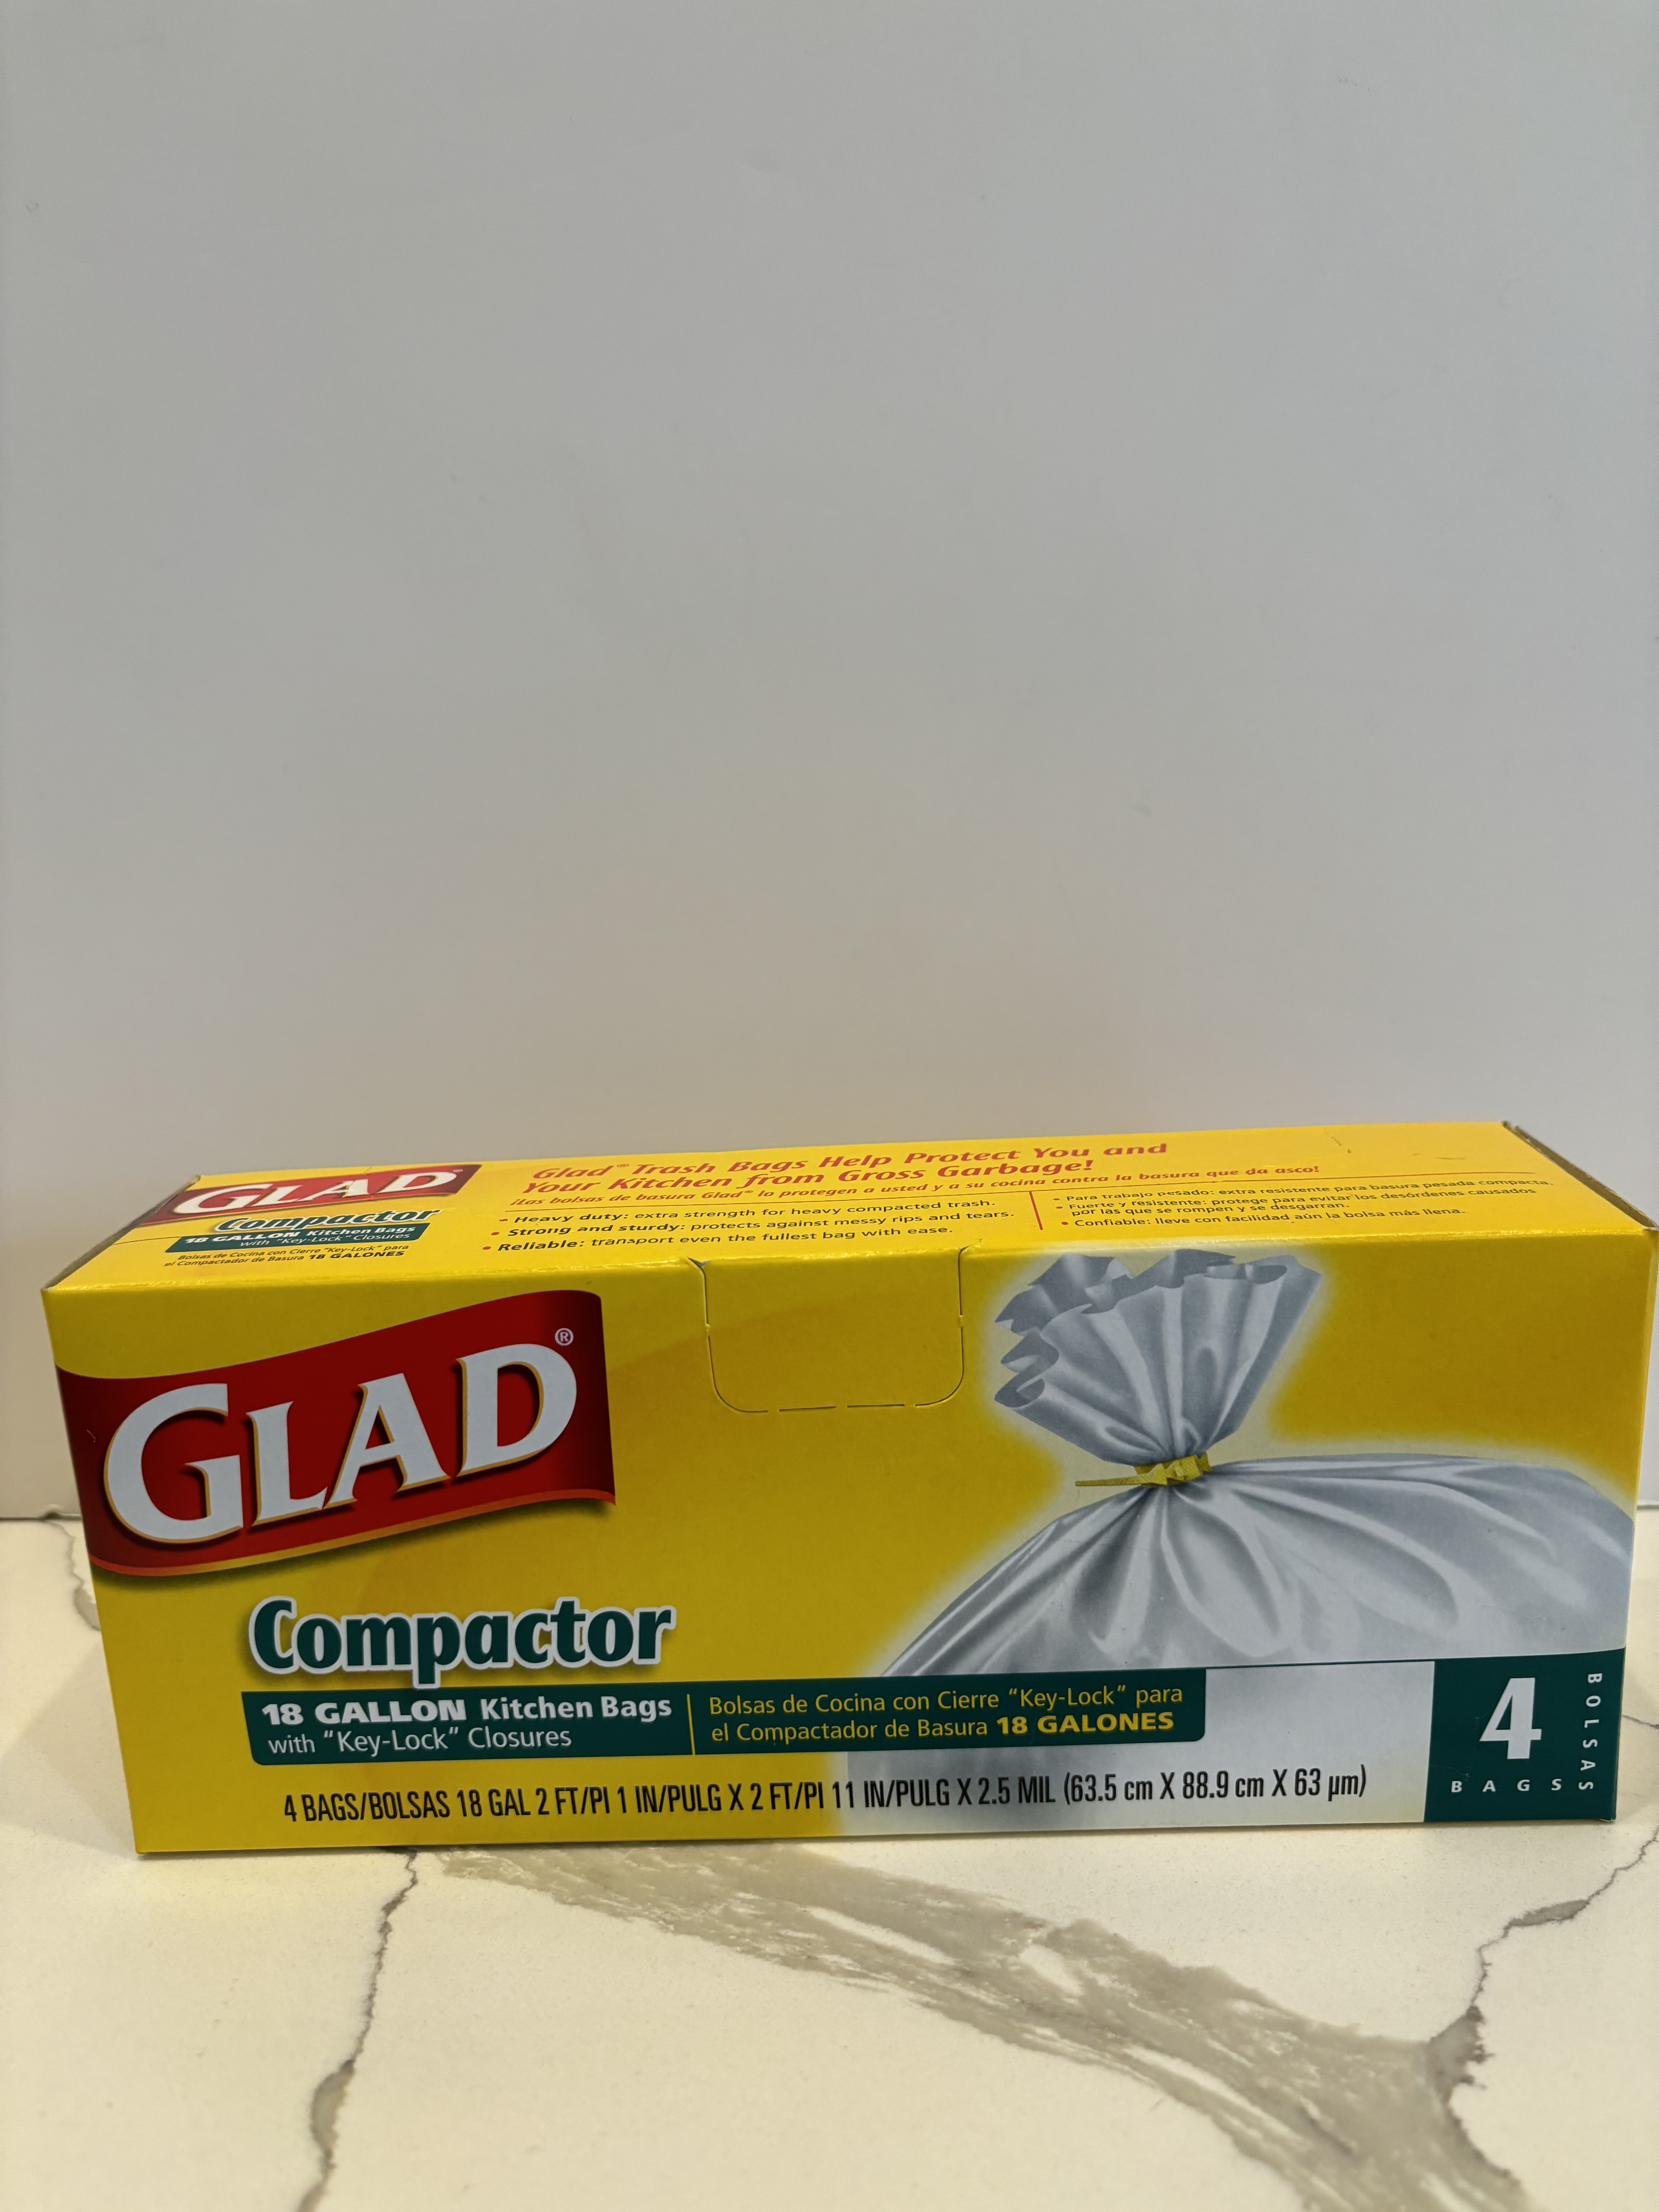 Glad 18 Gallon Compactor 4 count Trash Bags.  40,320 Boxes. EXW Chicago $2.25/box of 4ct.